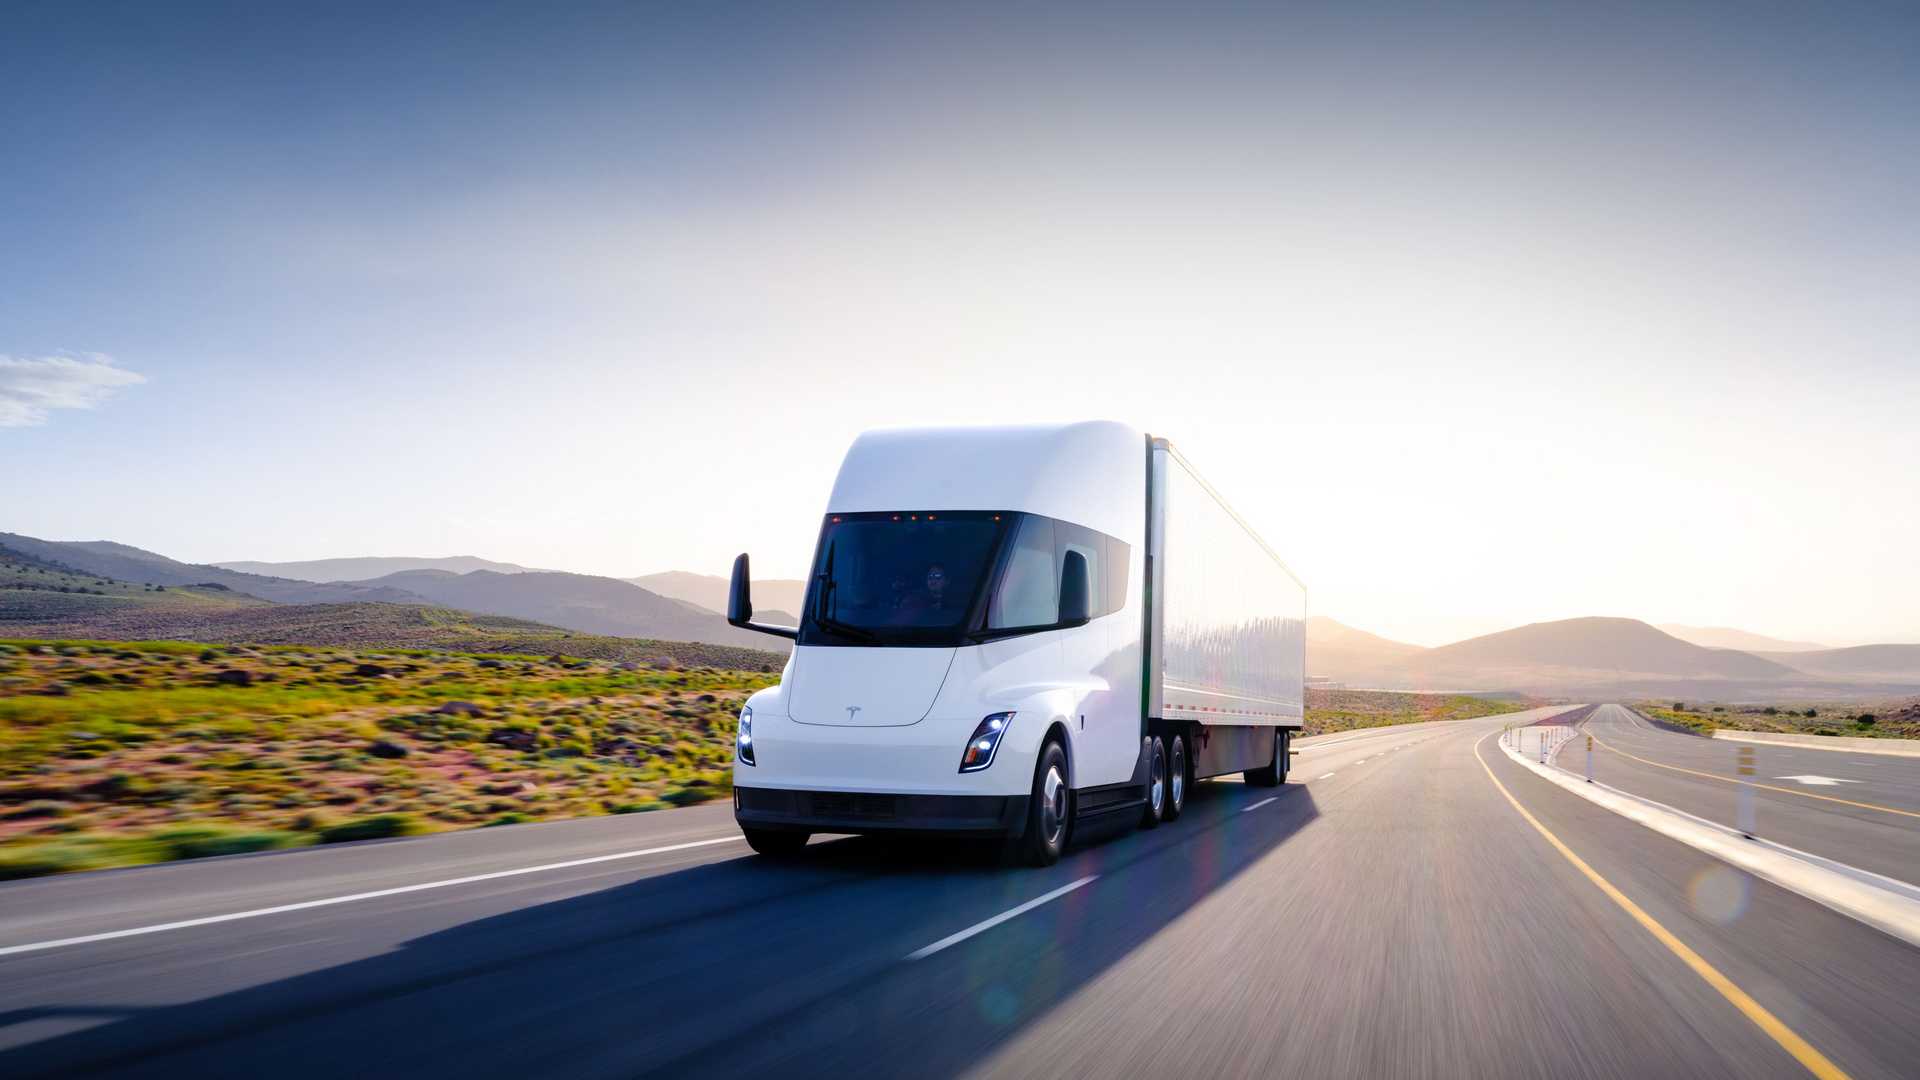 https://e-vehicleinfo.com/global/tesla-to-deliver-first-electric-semi-truck-to-pepsi-elon-musk/